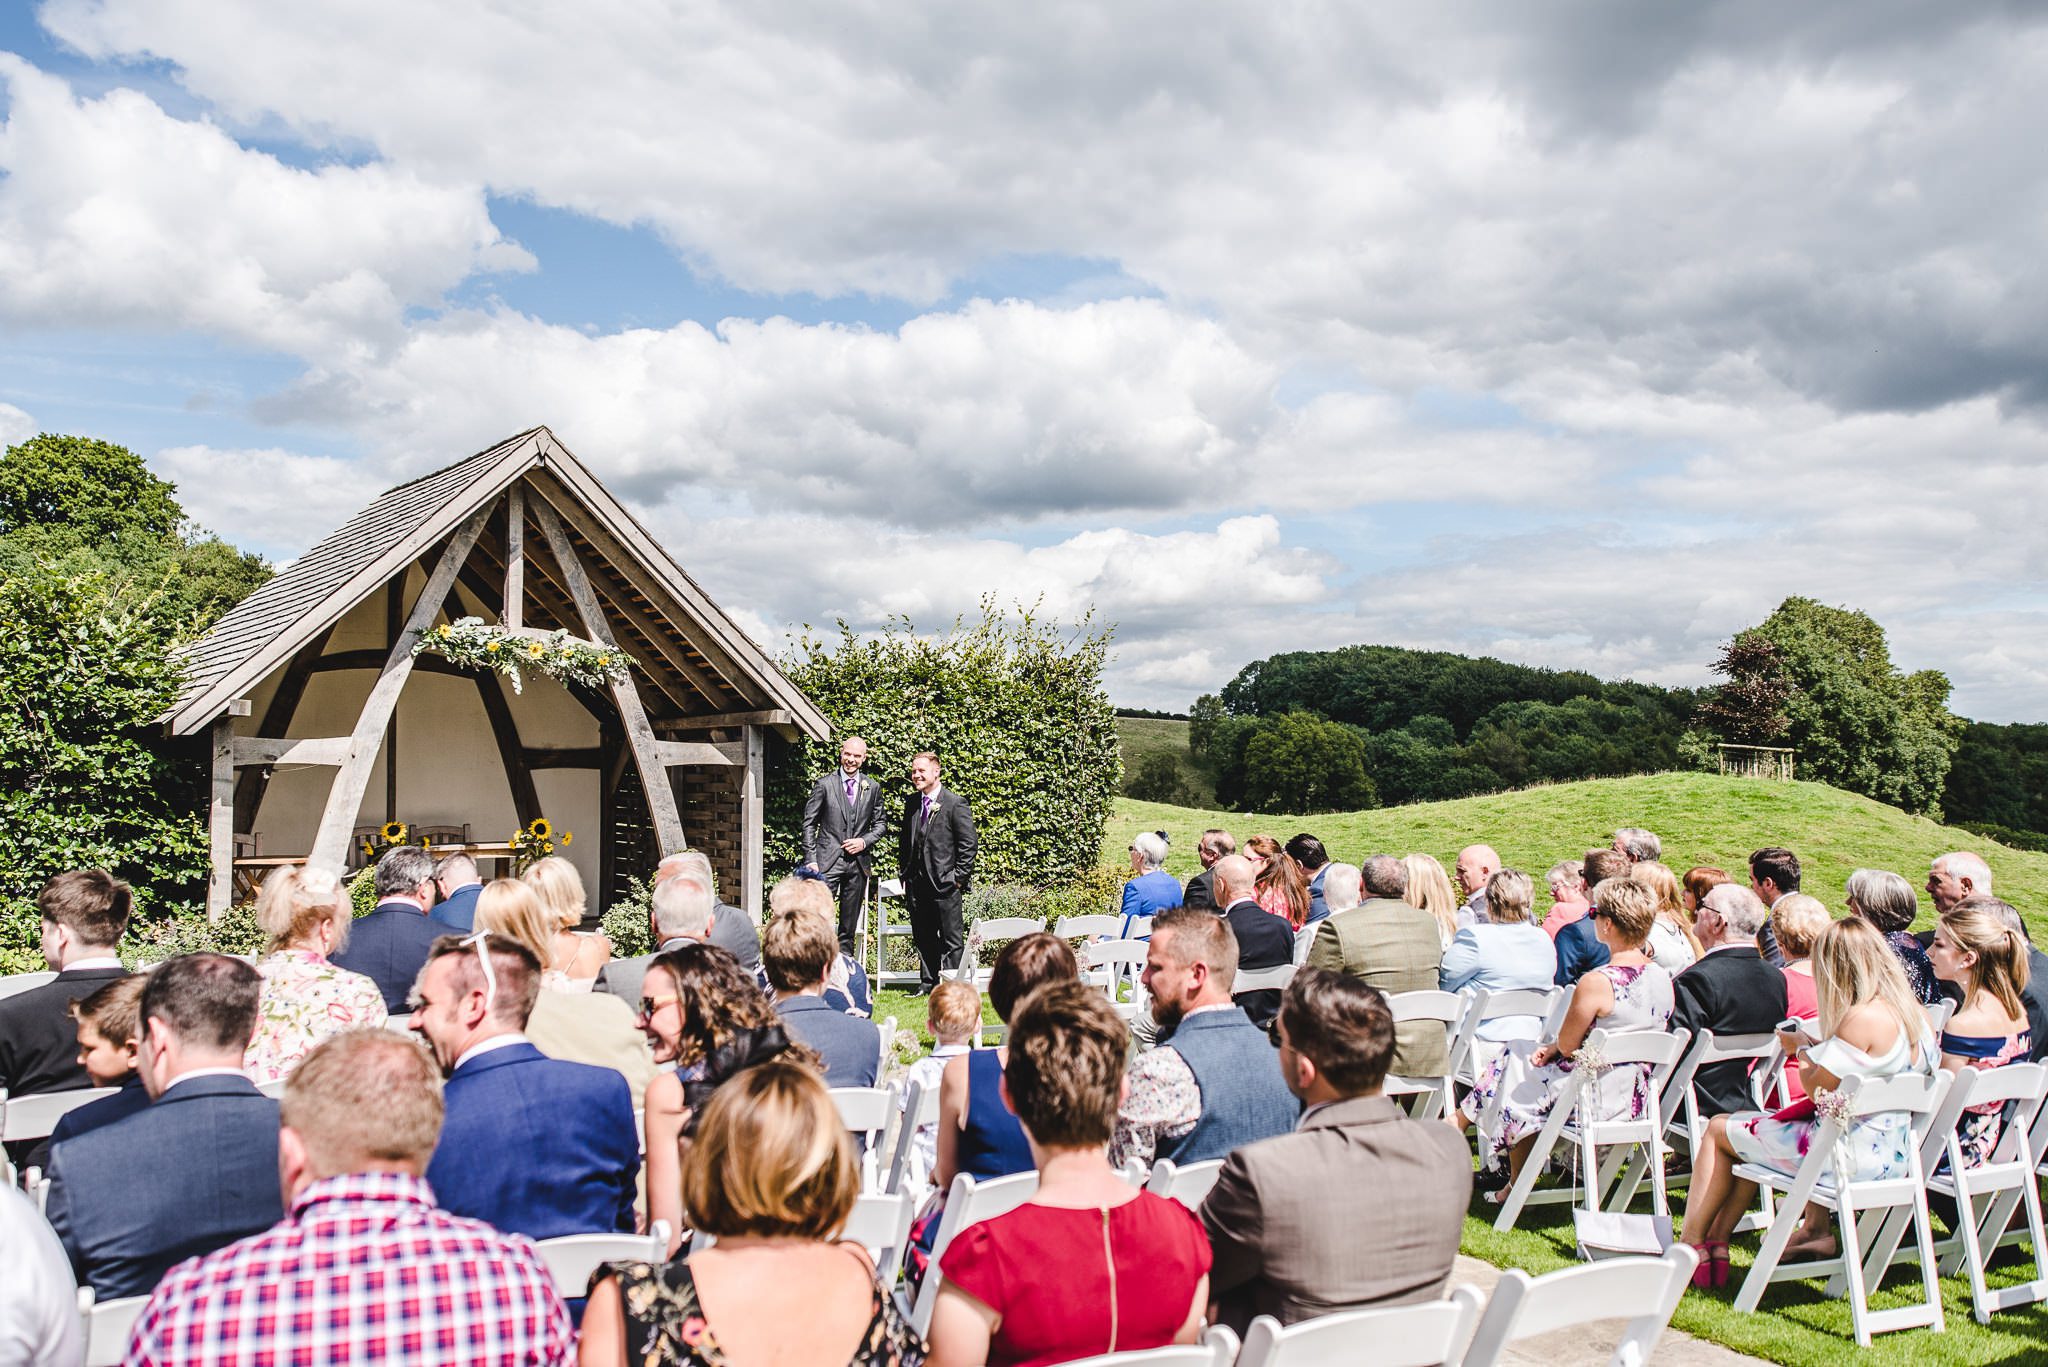 A groom standing at the altar at Kingscote Barn outdoor wedding venue waiting for his bride